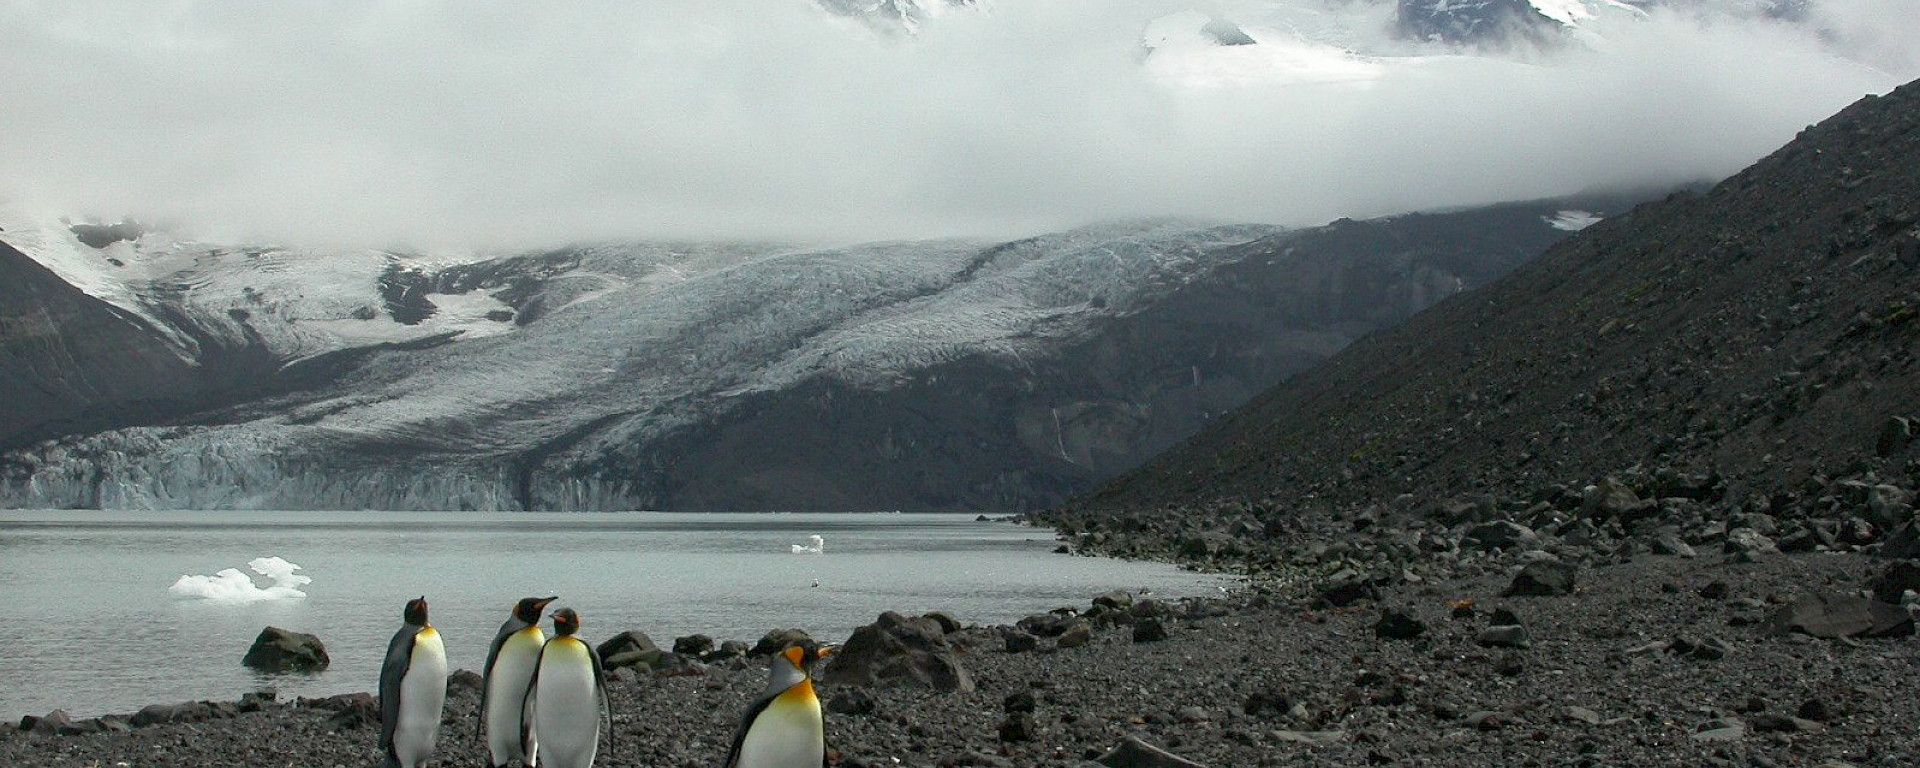 Penguins walk past the lake at the base of a snow-capped mountain.